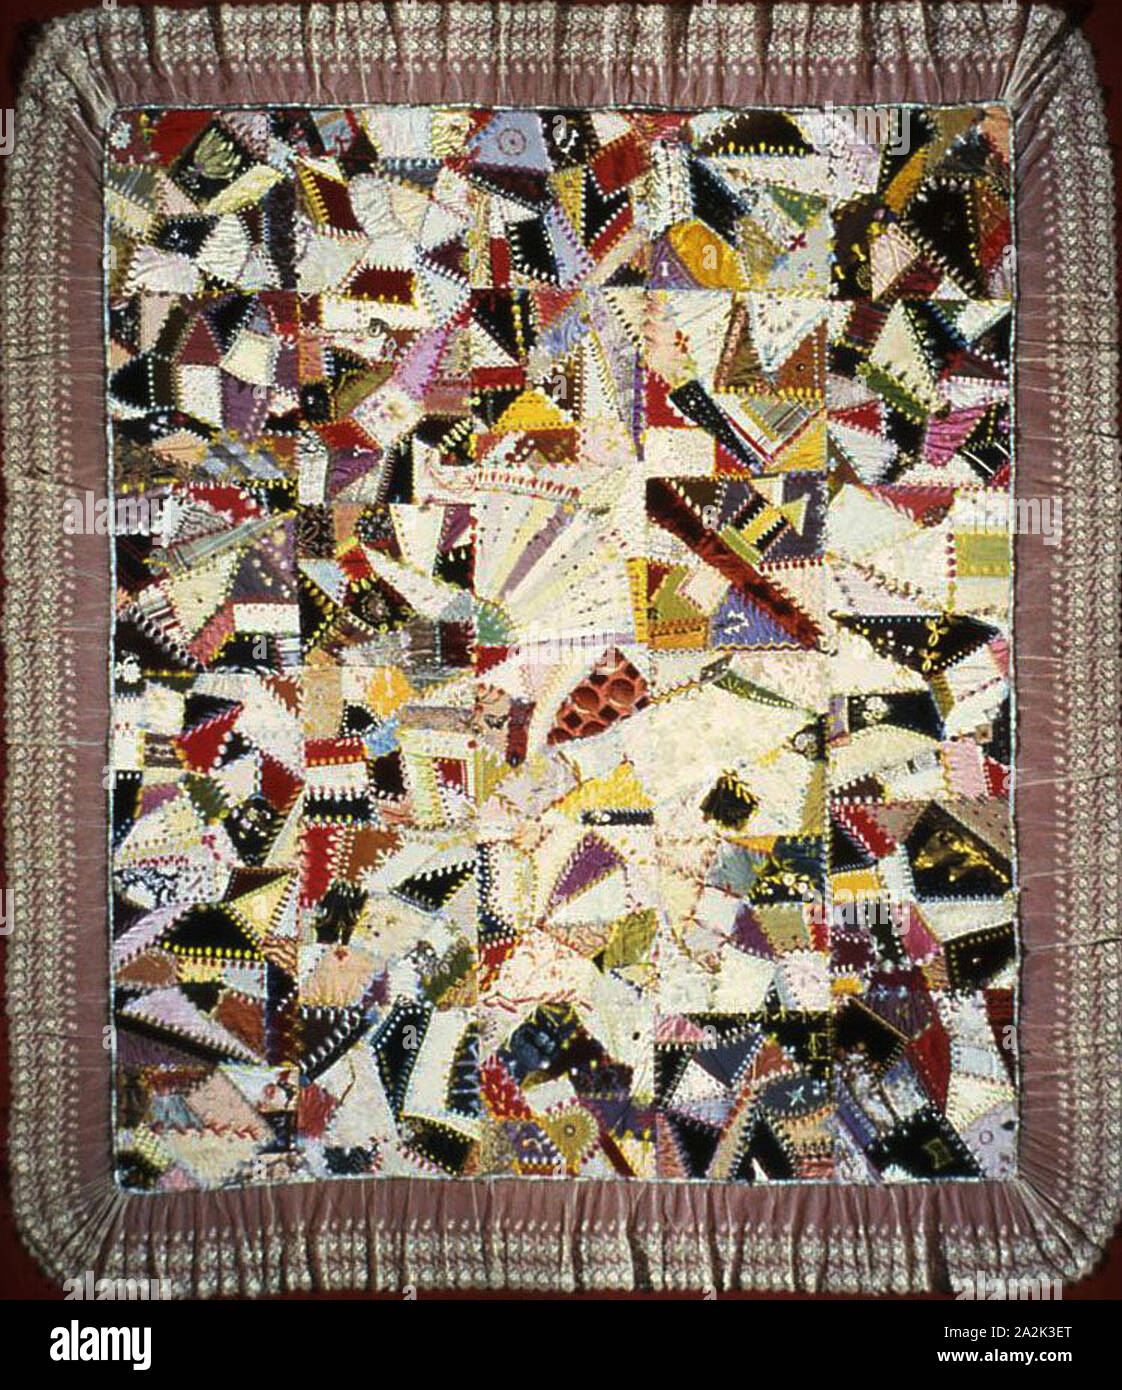 Bedcover (Crazy Quilt), 1880/85, United States, Silk, cotton, and wool, pieced plain, twill, and satin weaves, some with velvet, some with patterning and brocading wefts, and some self-patterned, some printed / painted, some watered (moiré), embroidered with silk, cotton, gilt-and-silvered-metal-strip-wrapped cotton and silk, and copper-metal-strip-wrapped wool in back, individual back, chain, detached chain, eyelet, feather, herringbone, overcast, satin, surface satin, single, stem stitches, laid work and couching, embellished and appliquéd with gilt and silver metal and gelatin paillettes Stock Photo